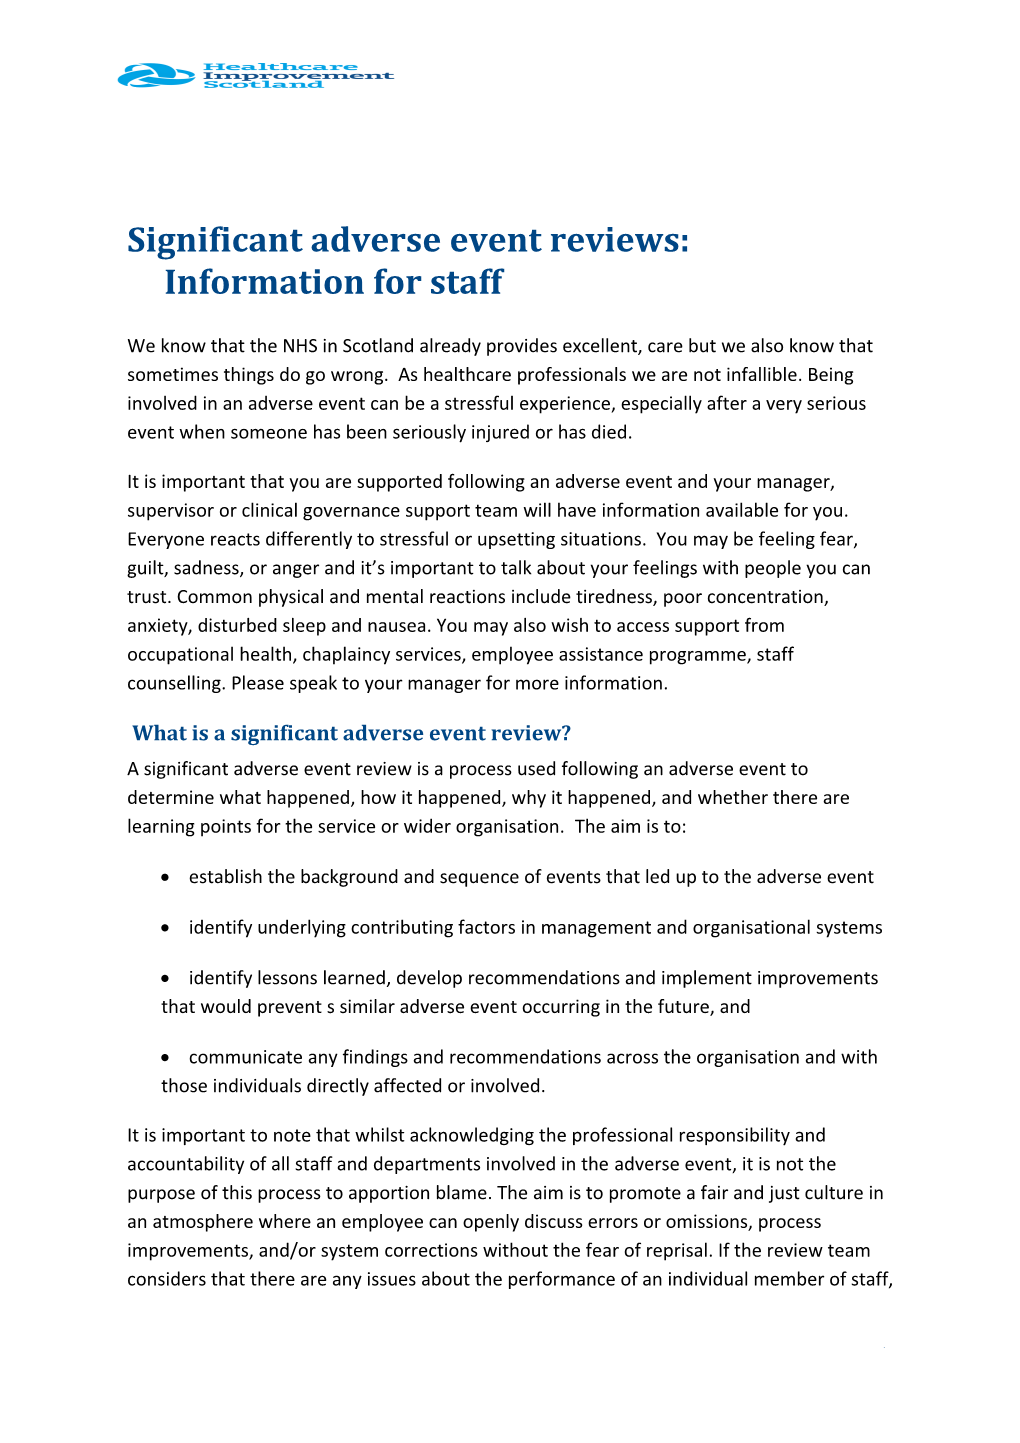 Significant Adverse Event Reviews: Information for Staff